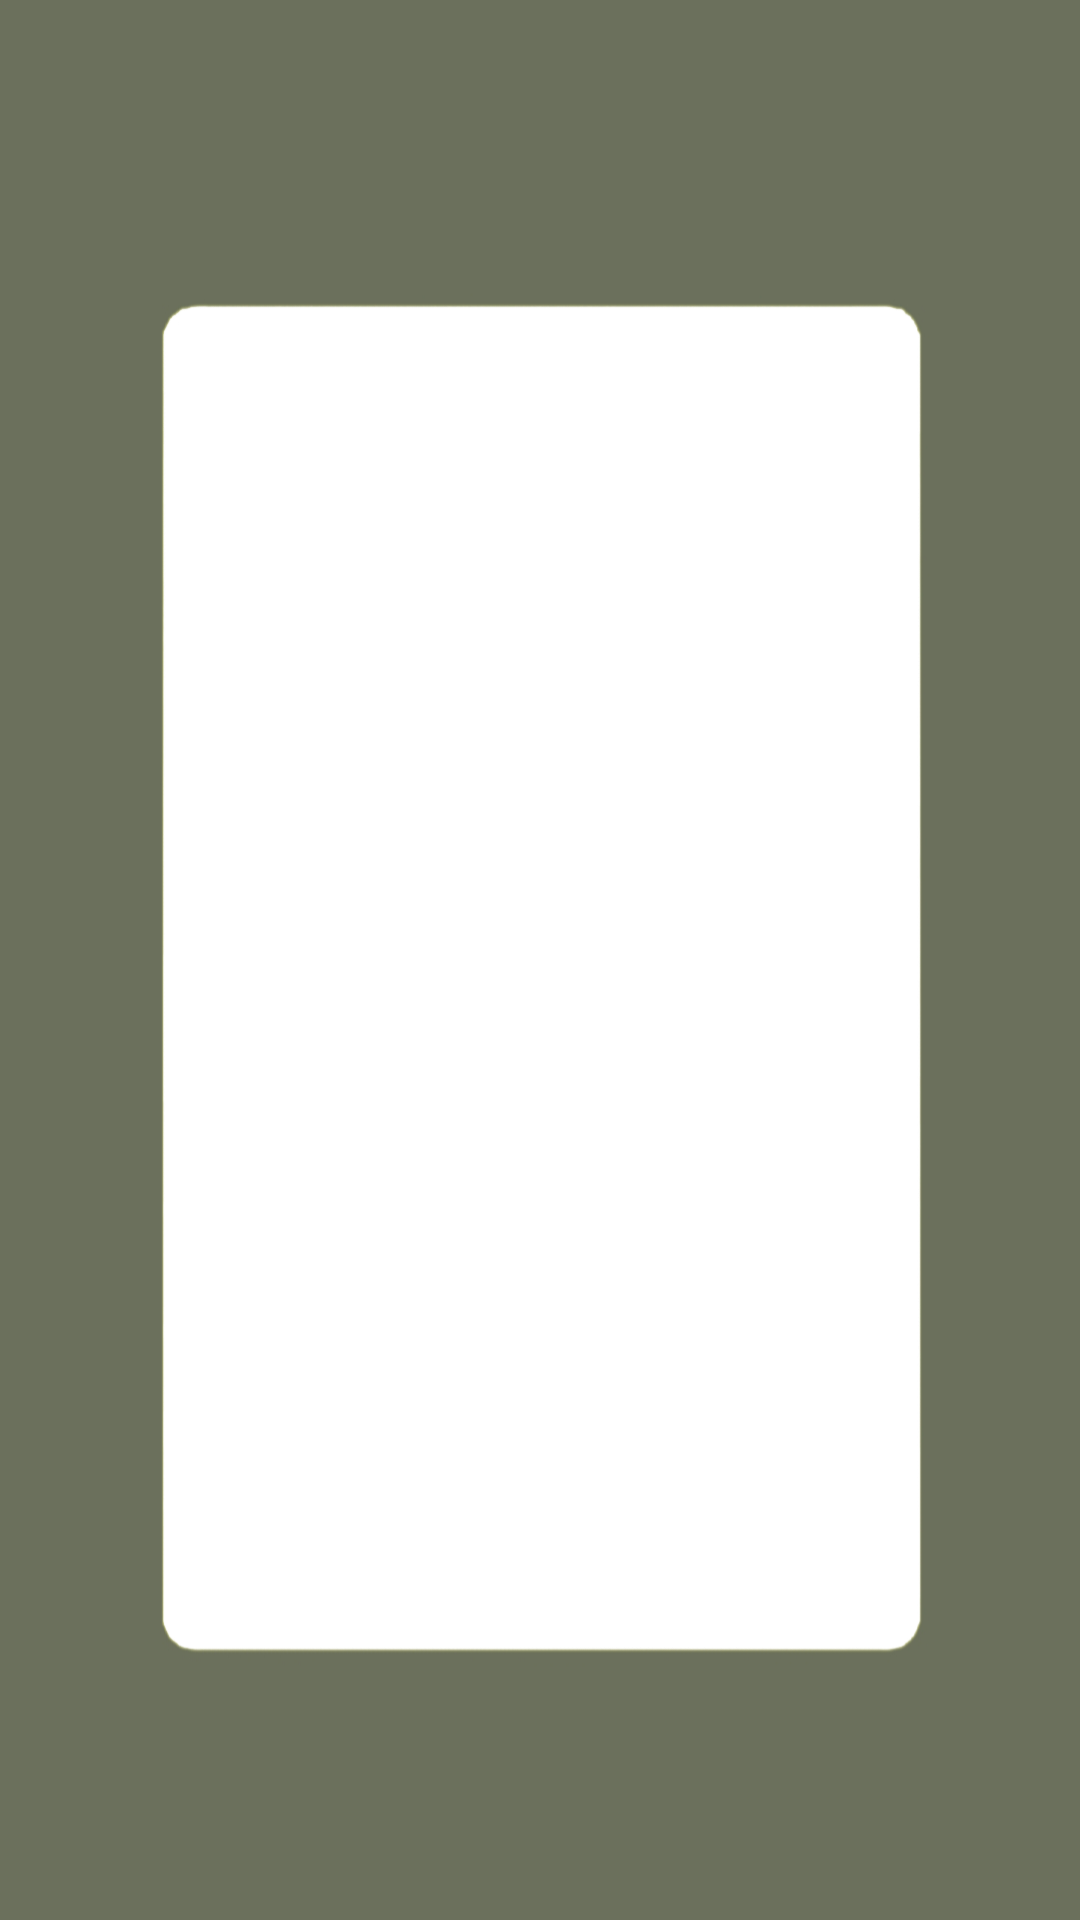 Round edge png - grey and green